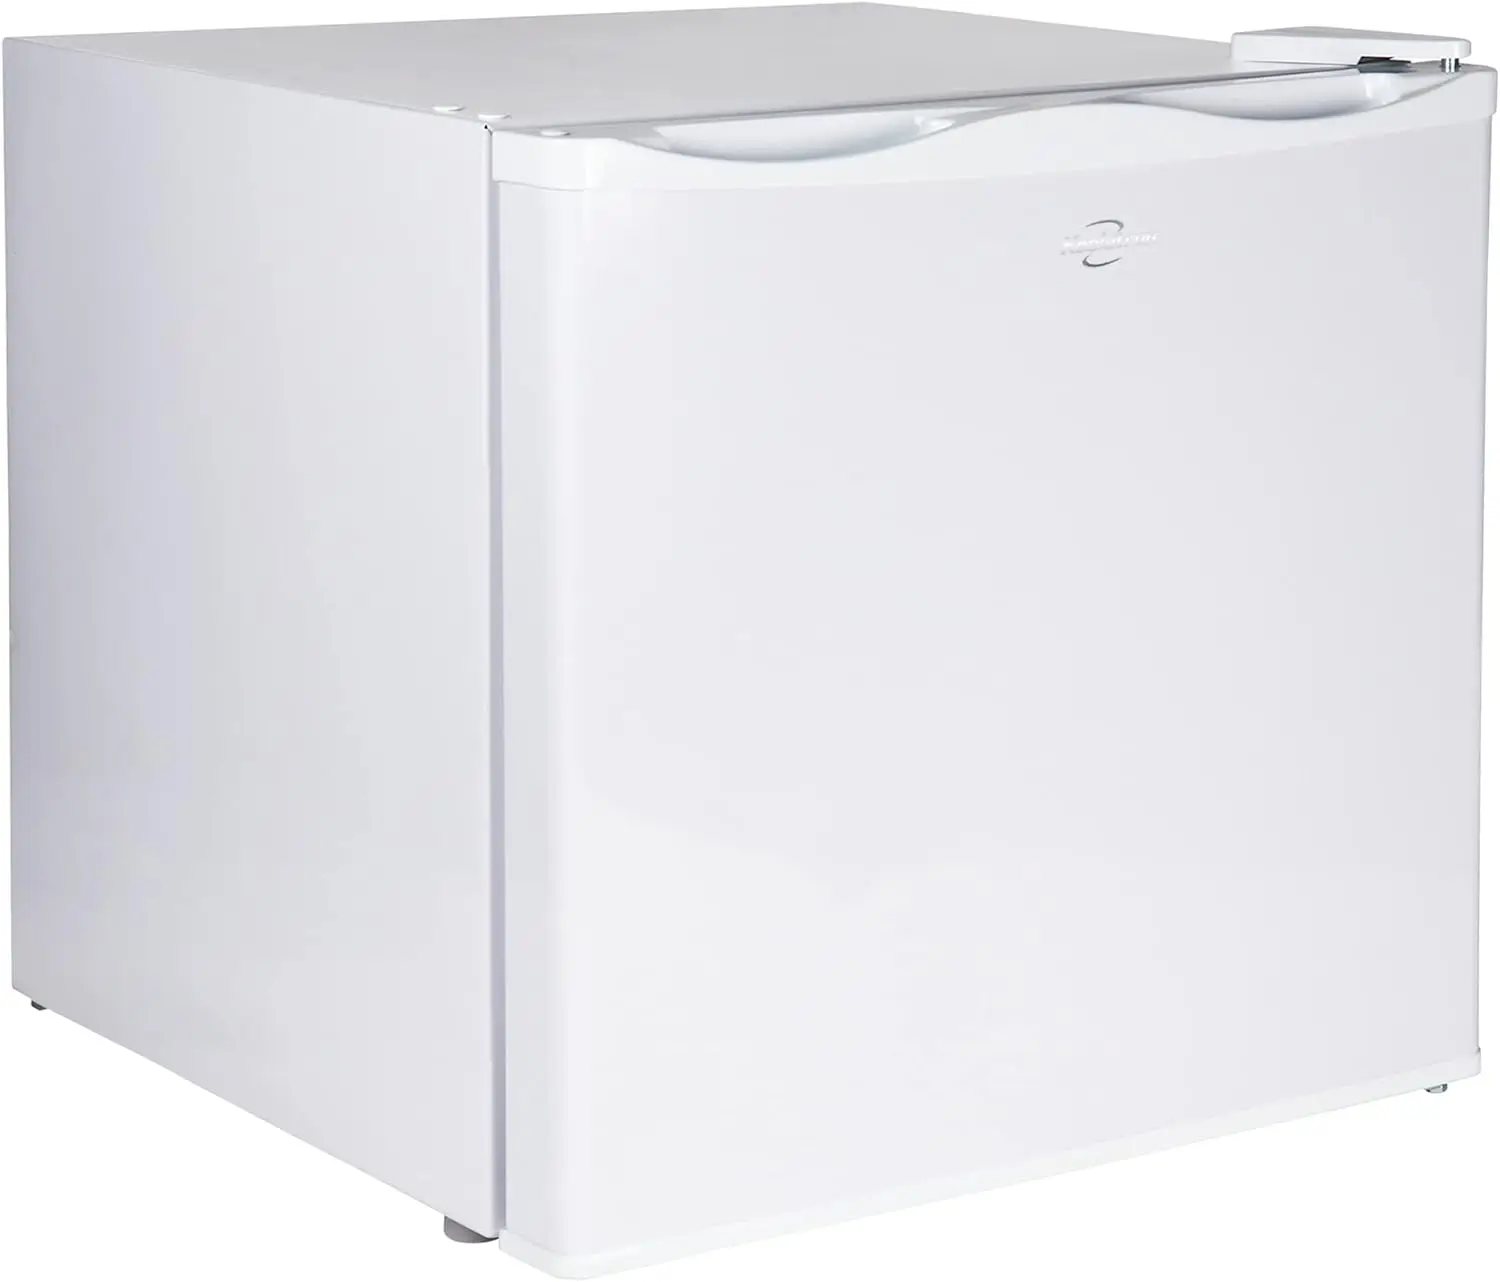 

Upright Freezer 1.2 cu ft (34L) White, Manual Defrost, Space-Saving Flat Back, Reversible Door, Wire Shelf, for Apartment, Condo